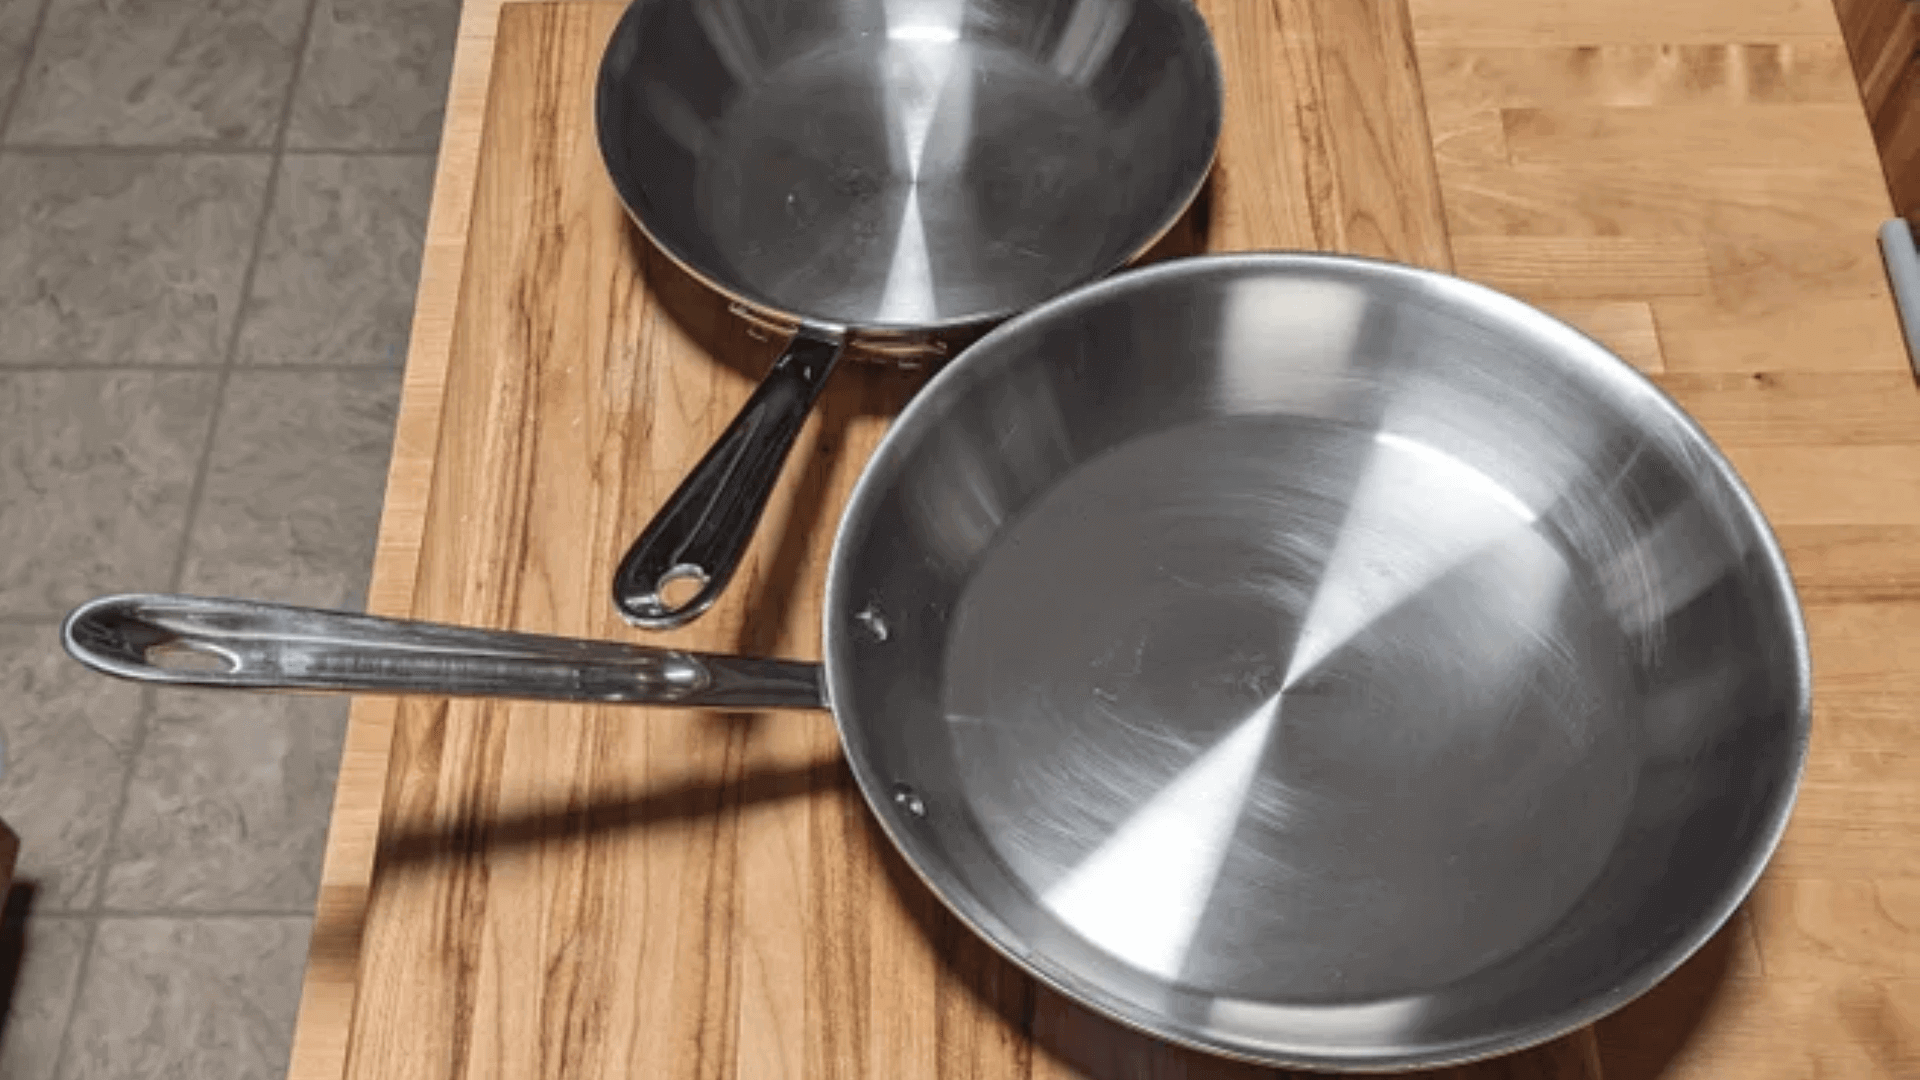 Here's How You Can Score All-Clad Cookware For Less